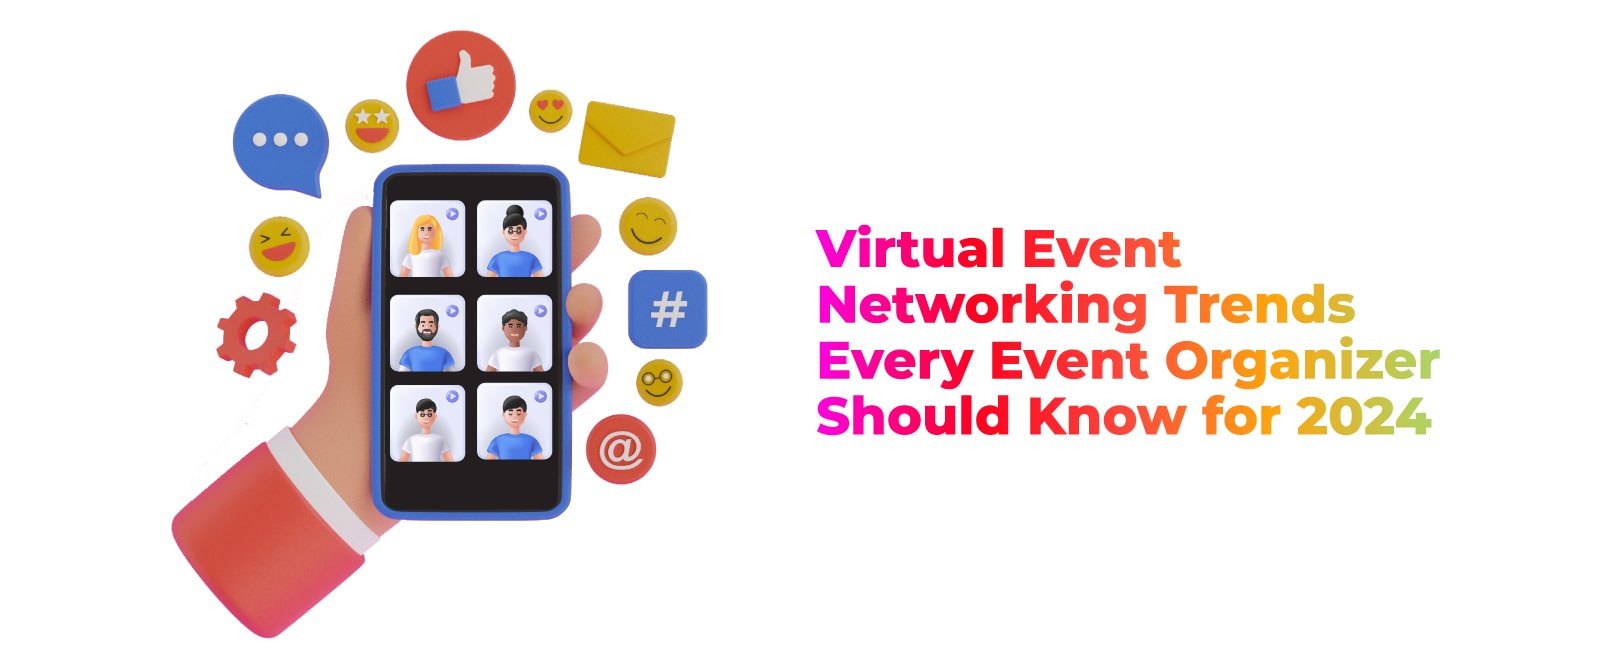 Virtual Event Networking Trends Every Event Organizer Should Know for 2024